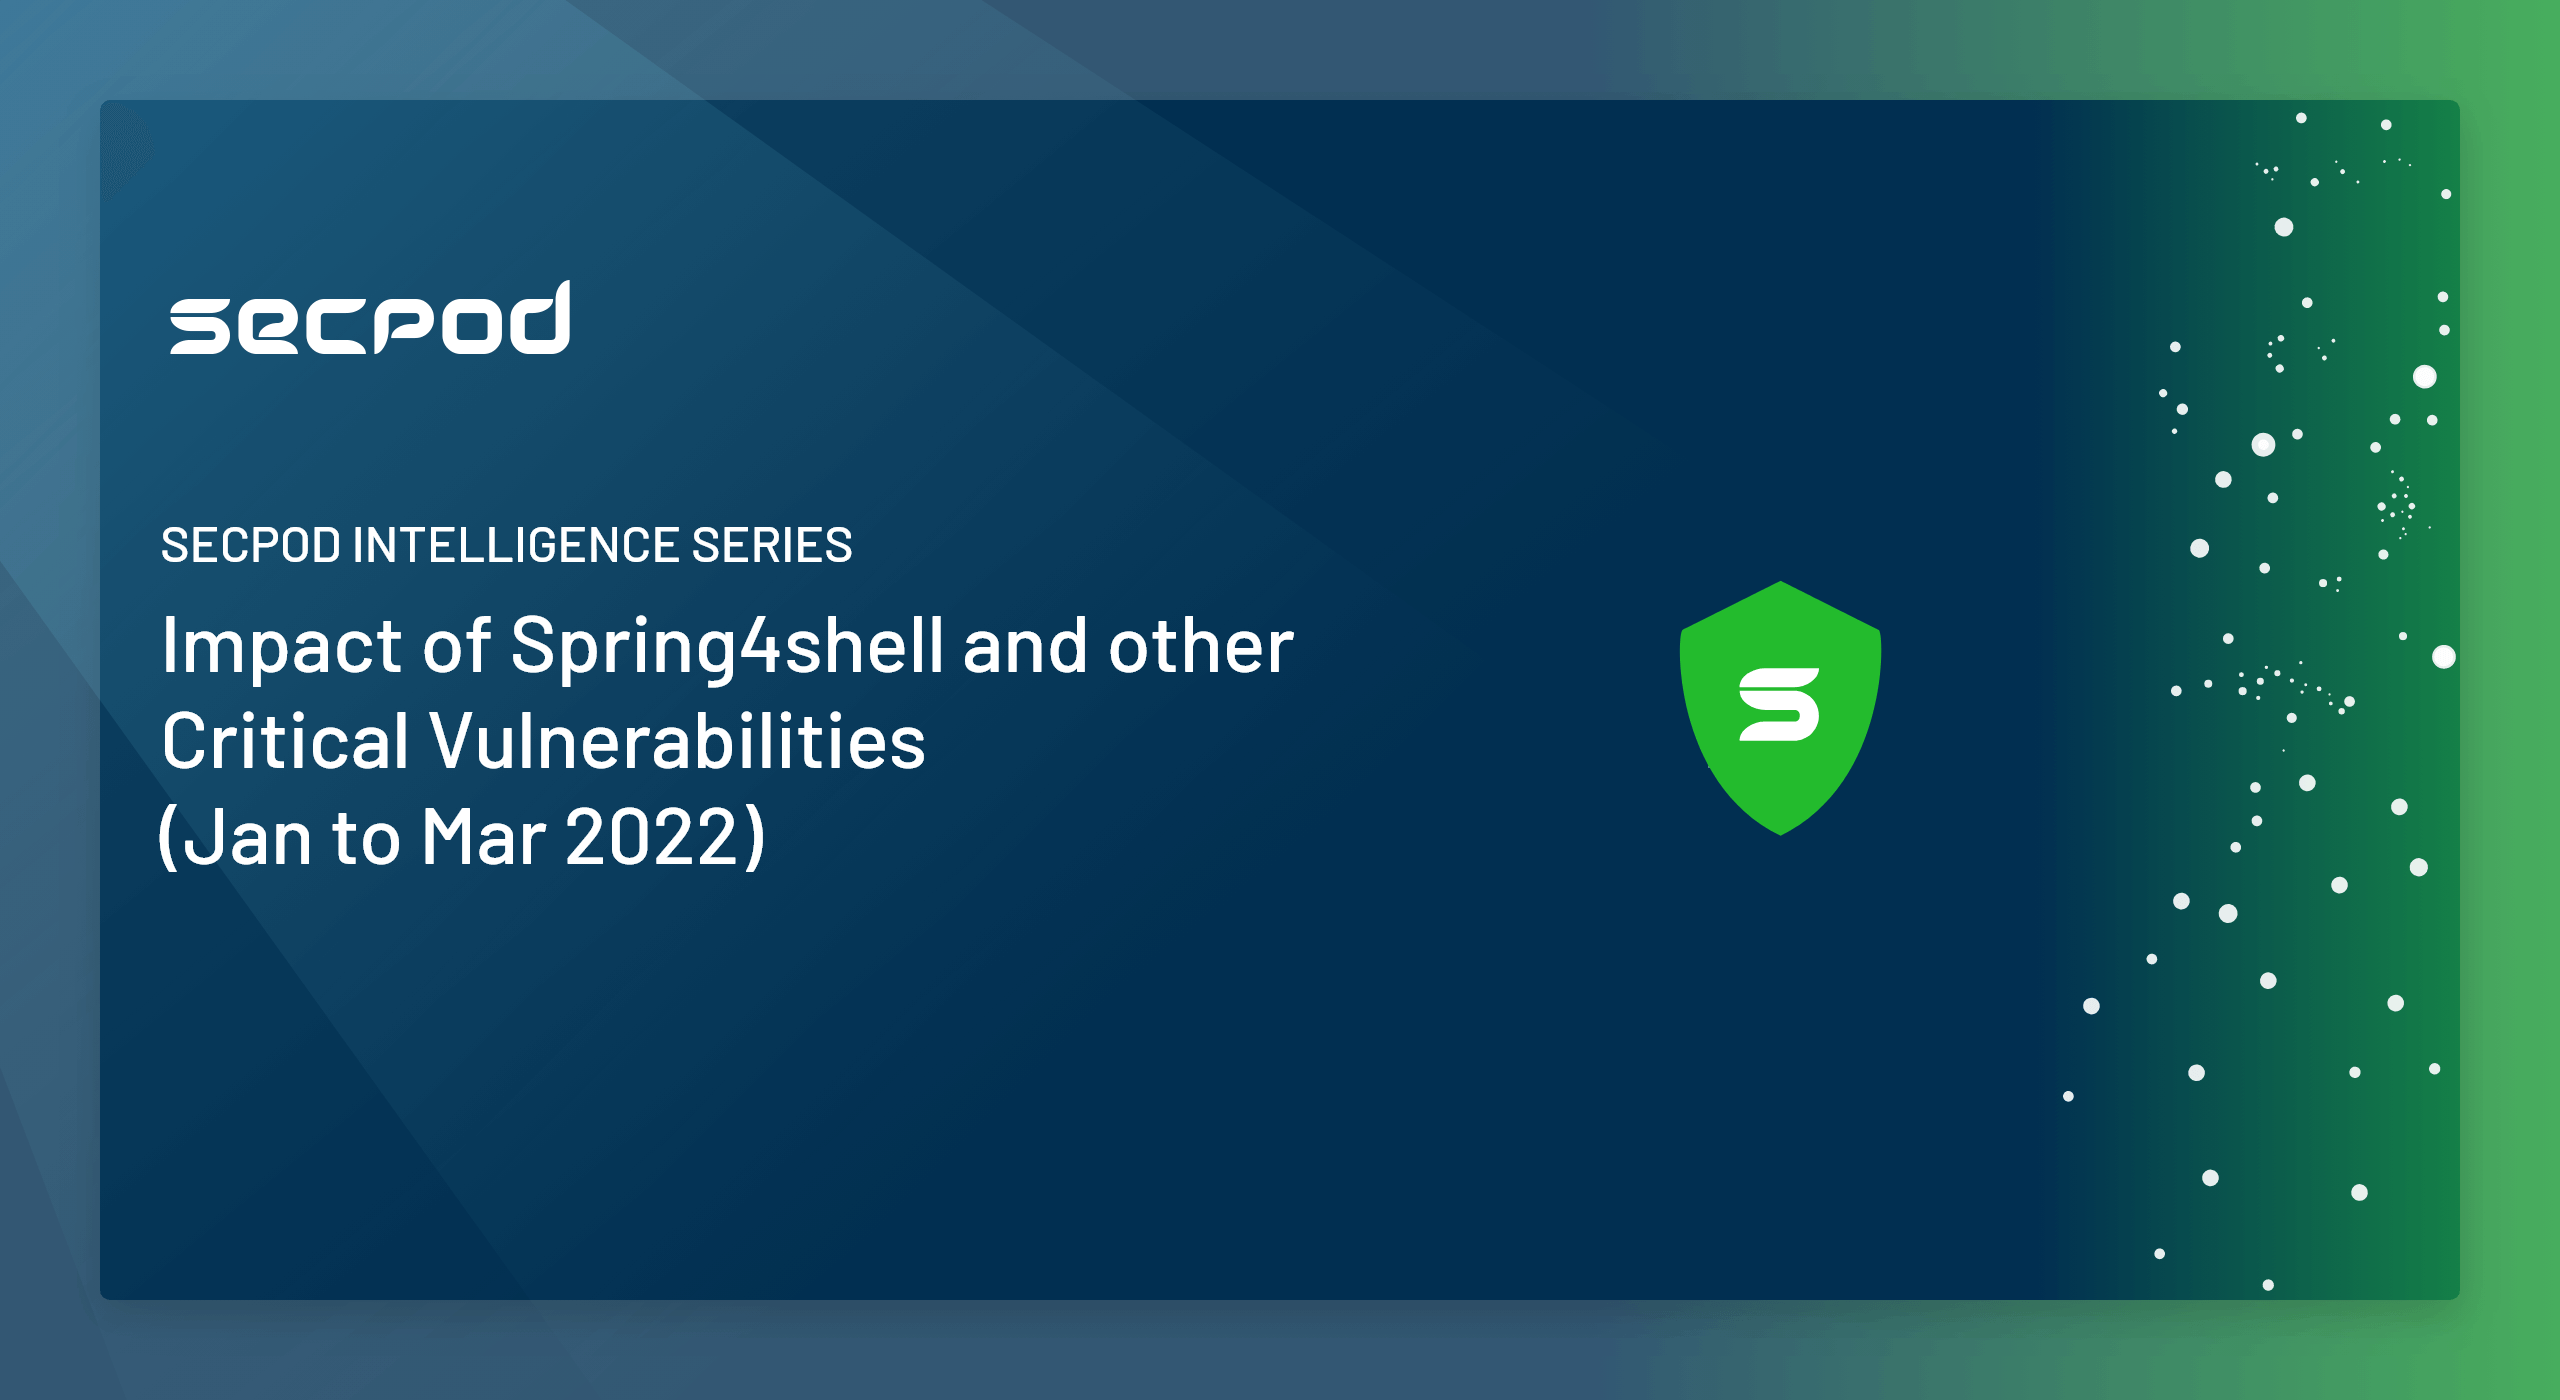 SecPod Intelligence Series- Impact of Spring4shell and other Critical Vulnerabilities (Jan to Mar 2022)